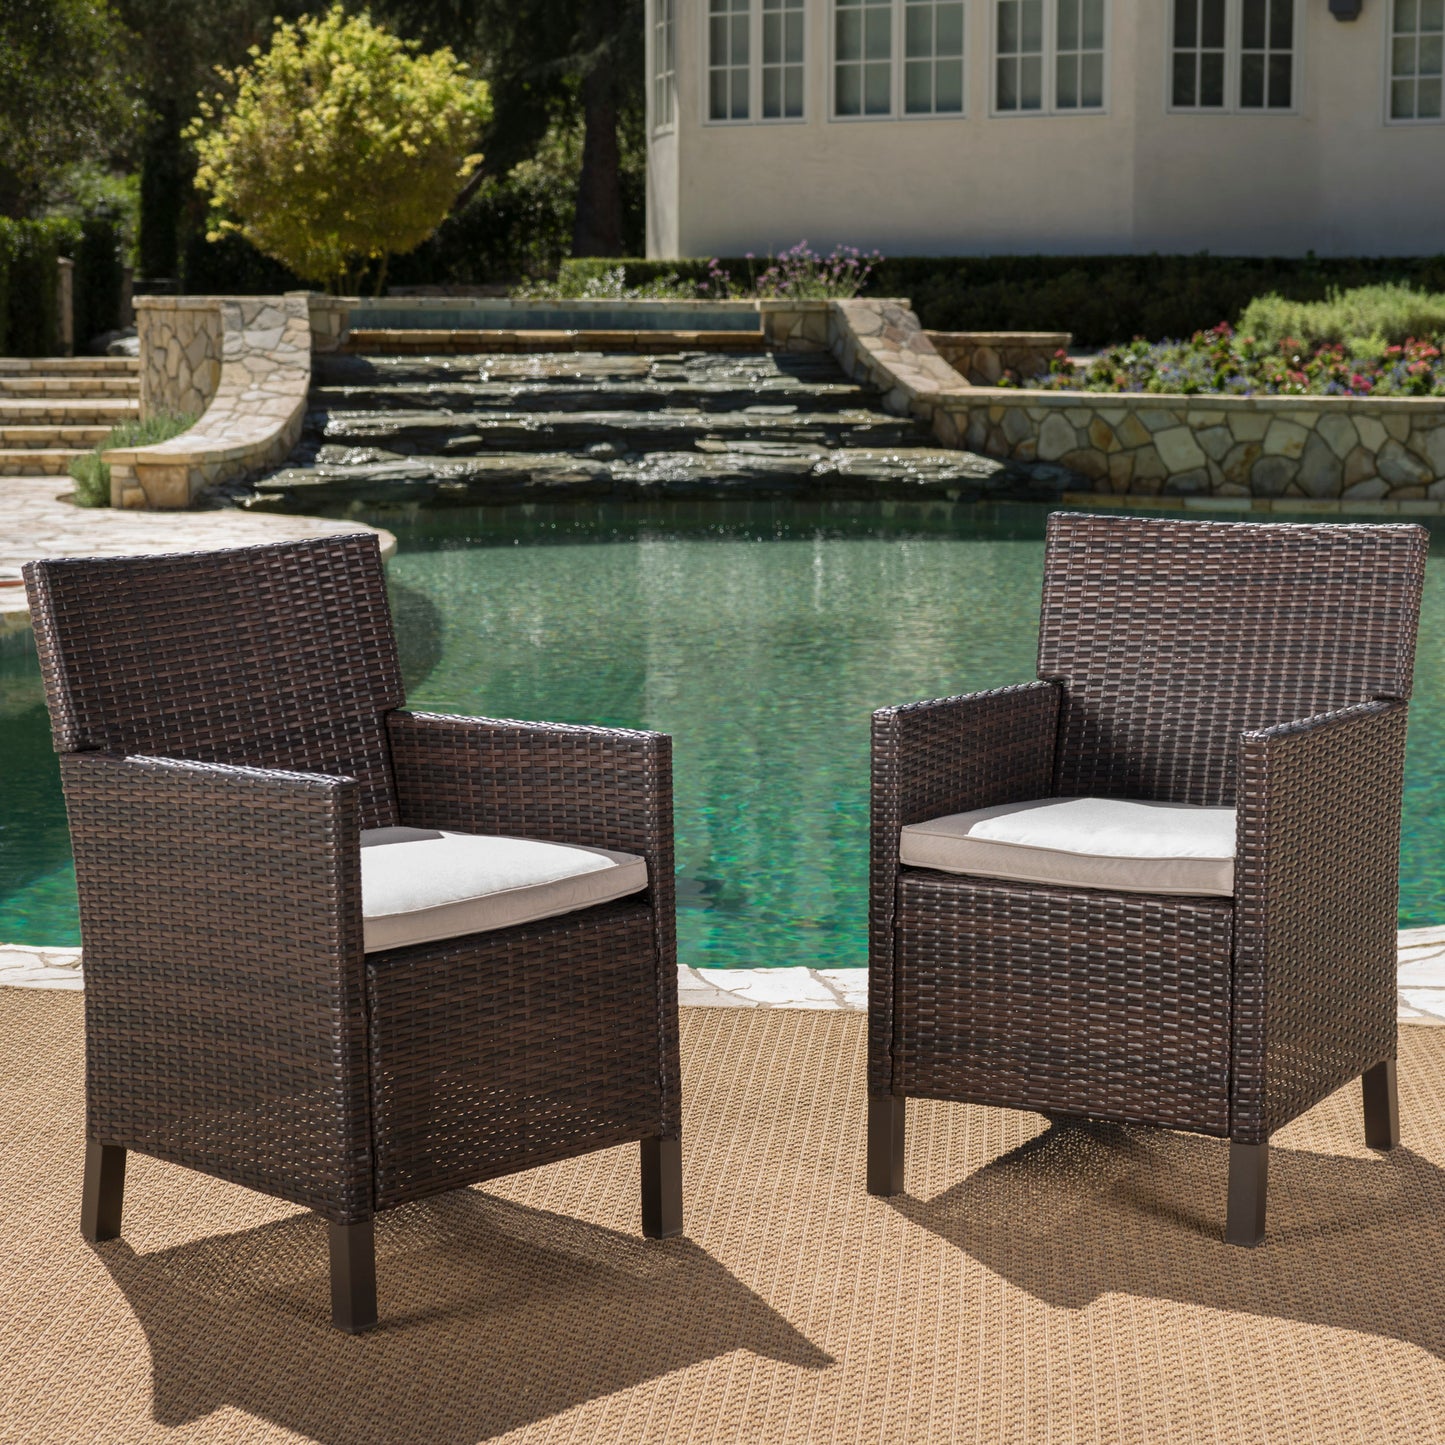 Cyrus Outdoor Wicker Dining Chairs with Water Resistant Cushions (Set of 2)